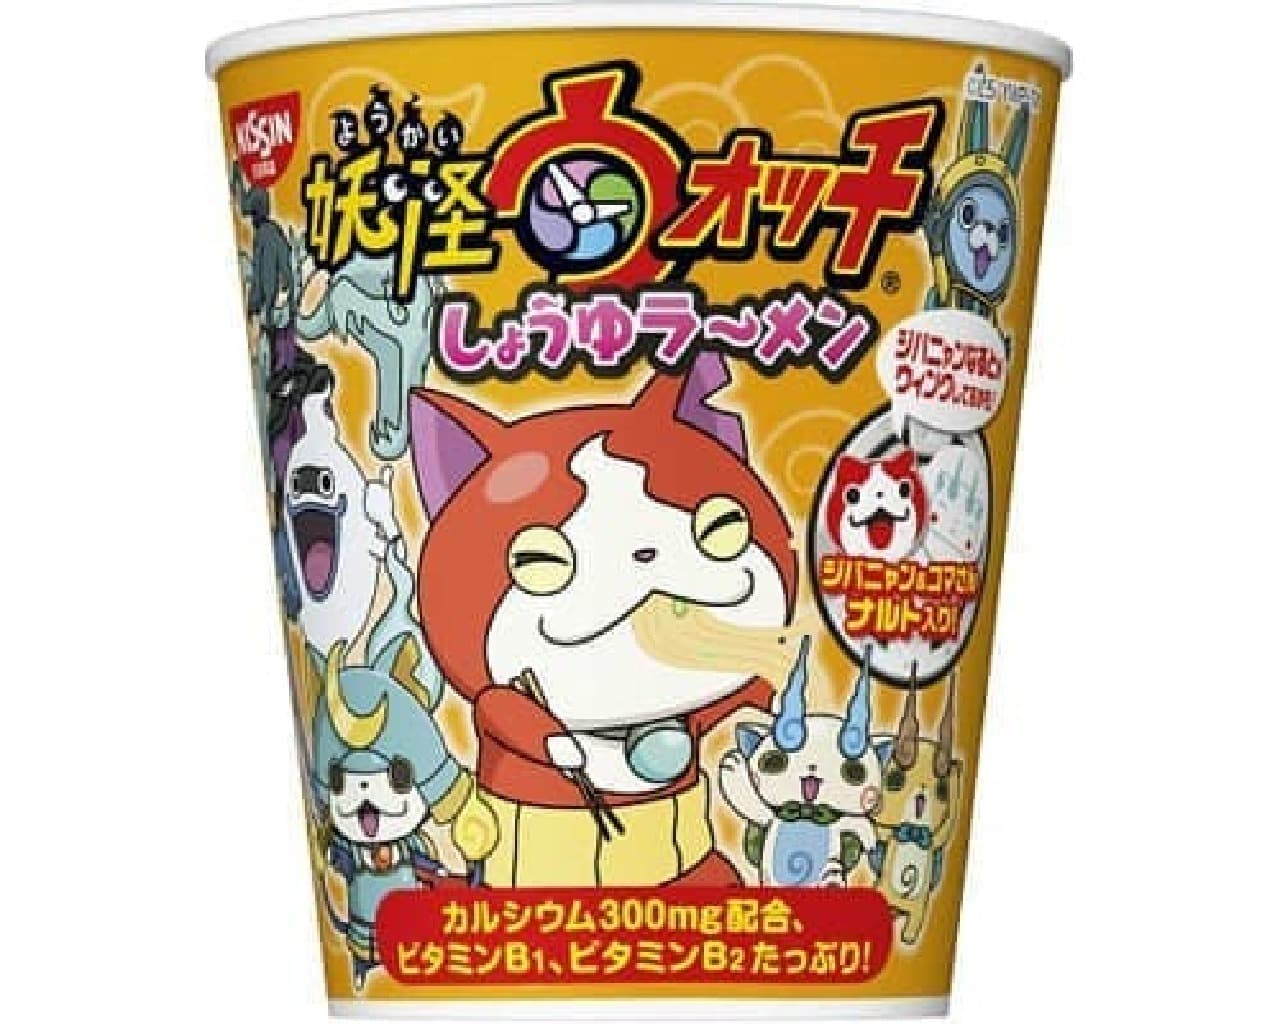 Jibanyan sipping noodles deliciously